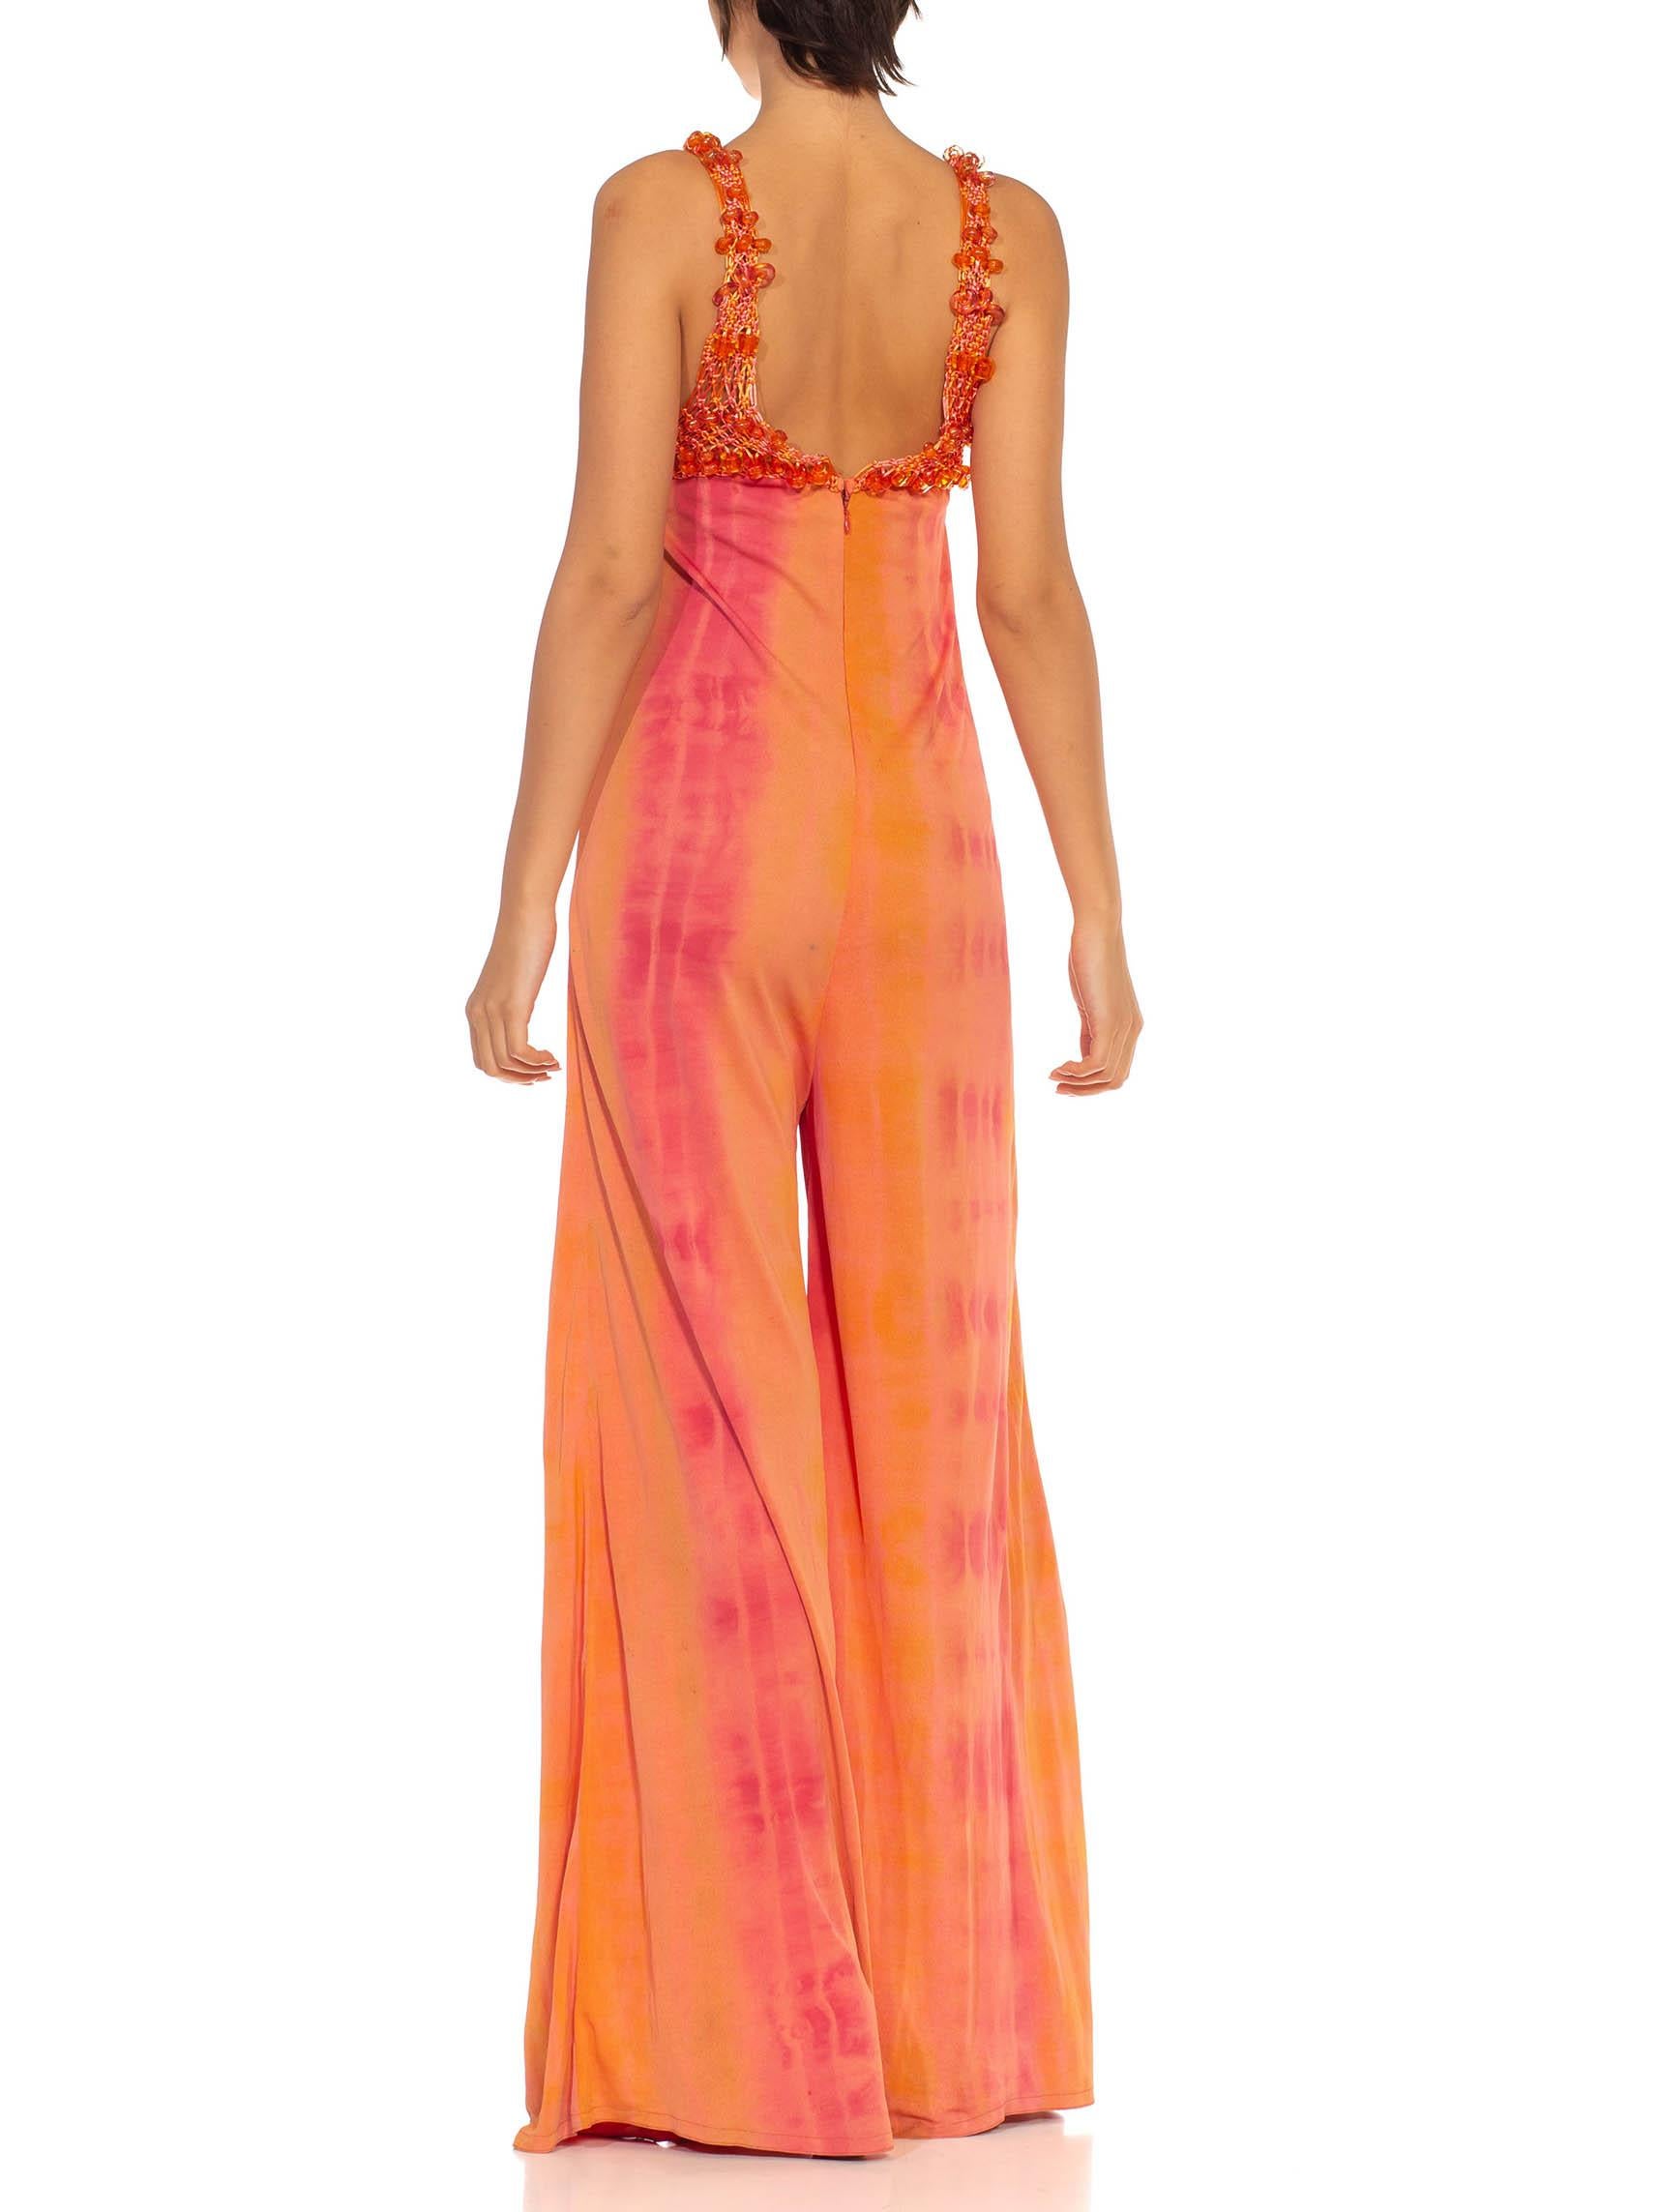 2000S Orange Peach Poly Blend Jersey Tie Dye Jumpsuit With Crochet Beaded Straps For Sale 1